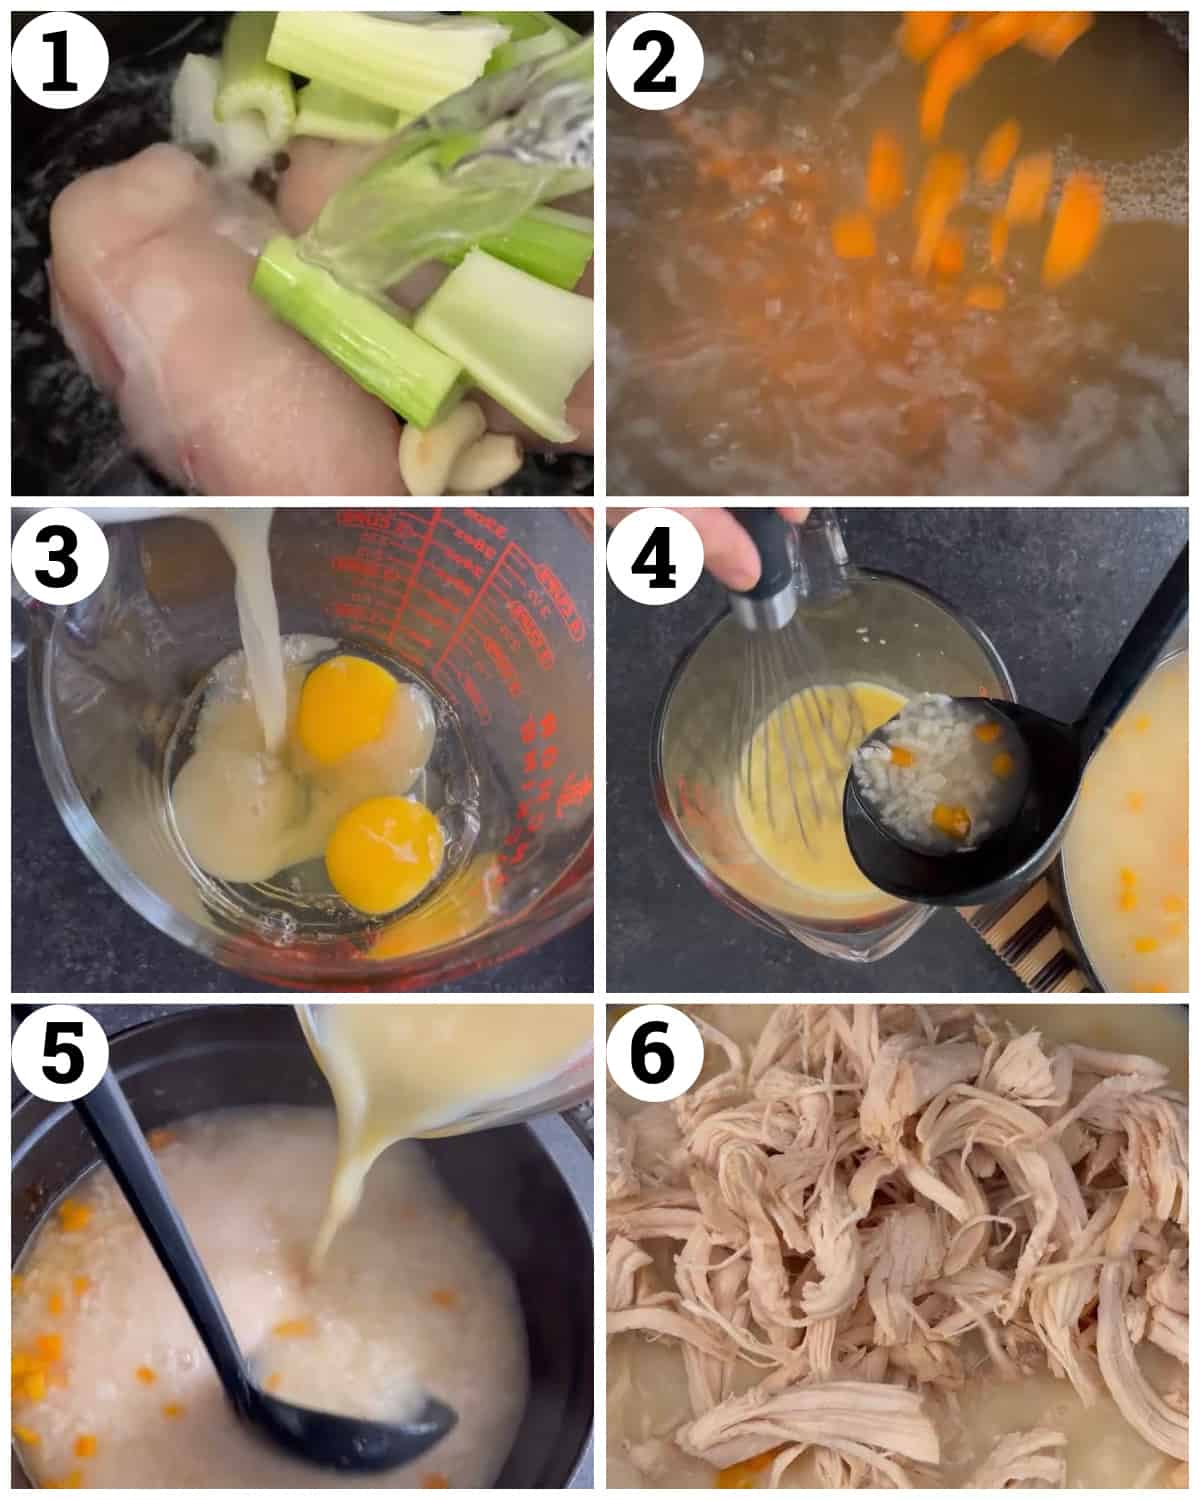 cook the chicken with the vegetables. Cook the rice and carrots in the broth then temper the eggs and lemon juice with the soup. Return and add the chicken. 